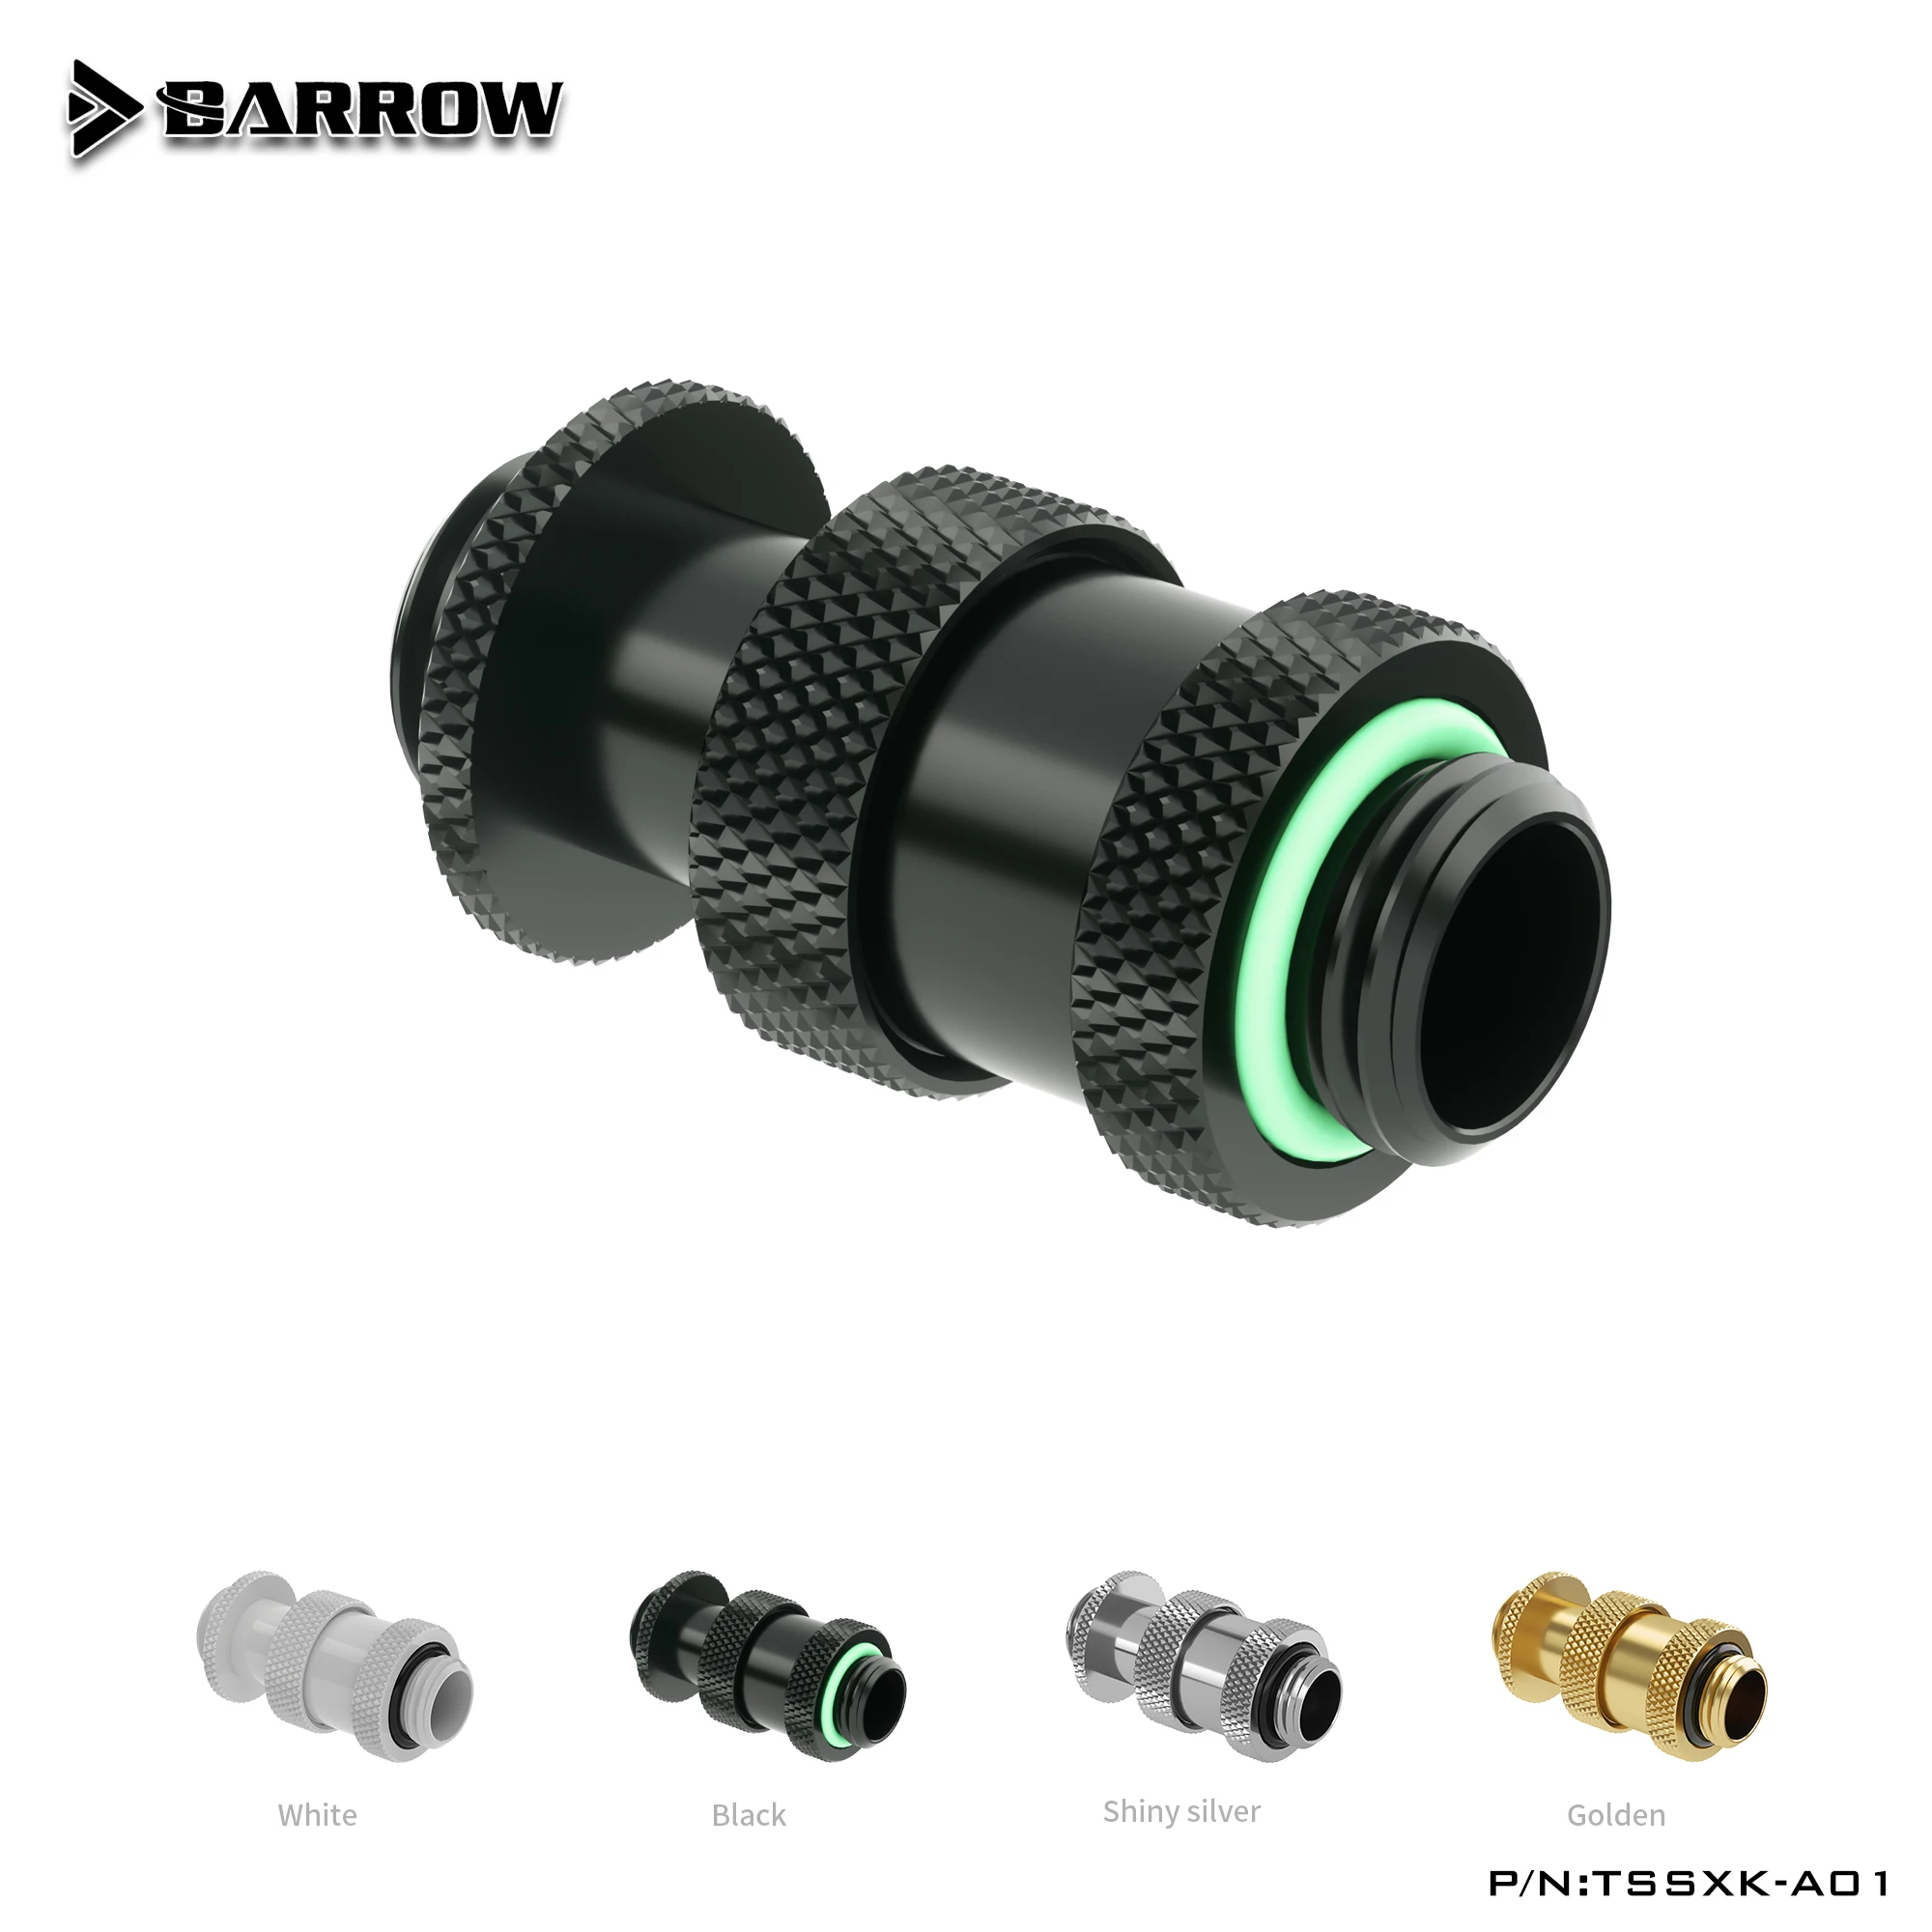 

Barrow Rotary Connectors Extender (22-31mm) use for SLI CF Card G1/4" Male to Male Cross Fire Fitting Metal Telescopic fitting